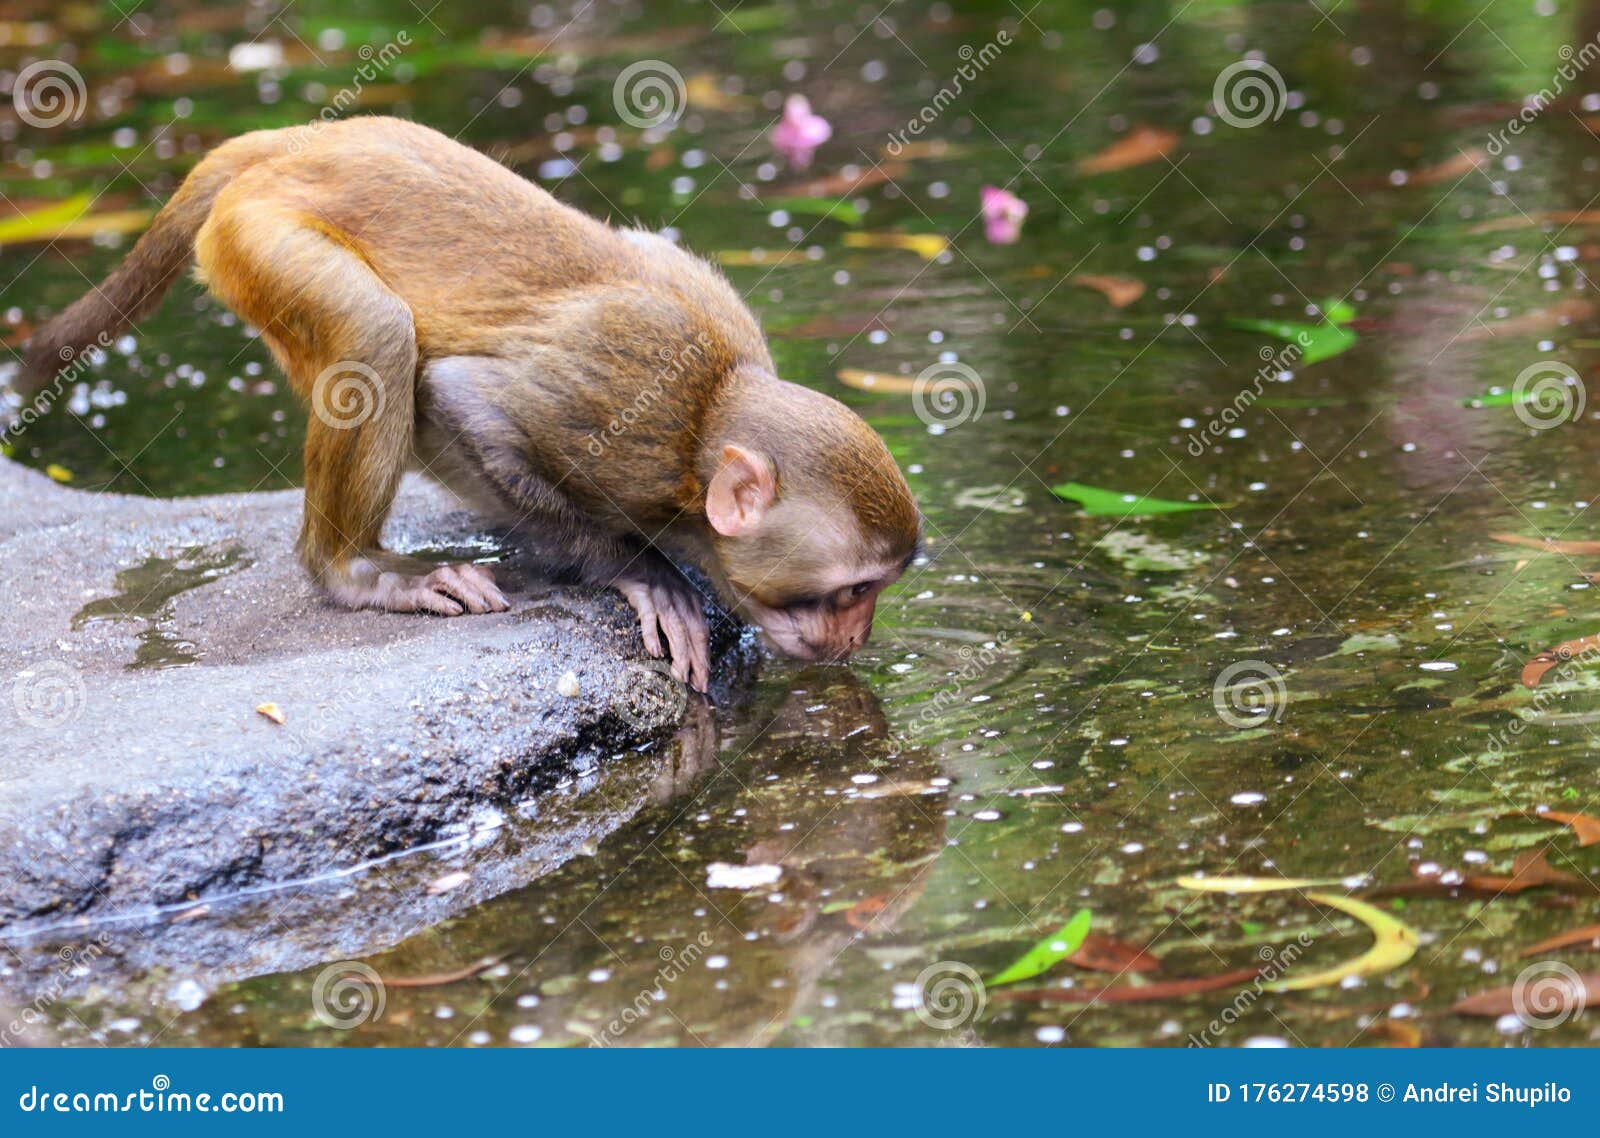 A Monkey Drinks Water in a Pond in a Park Stock Photo - Image of animal,  macaca: 176274598